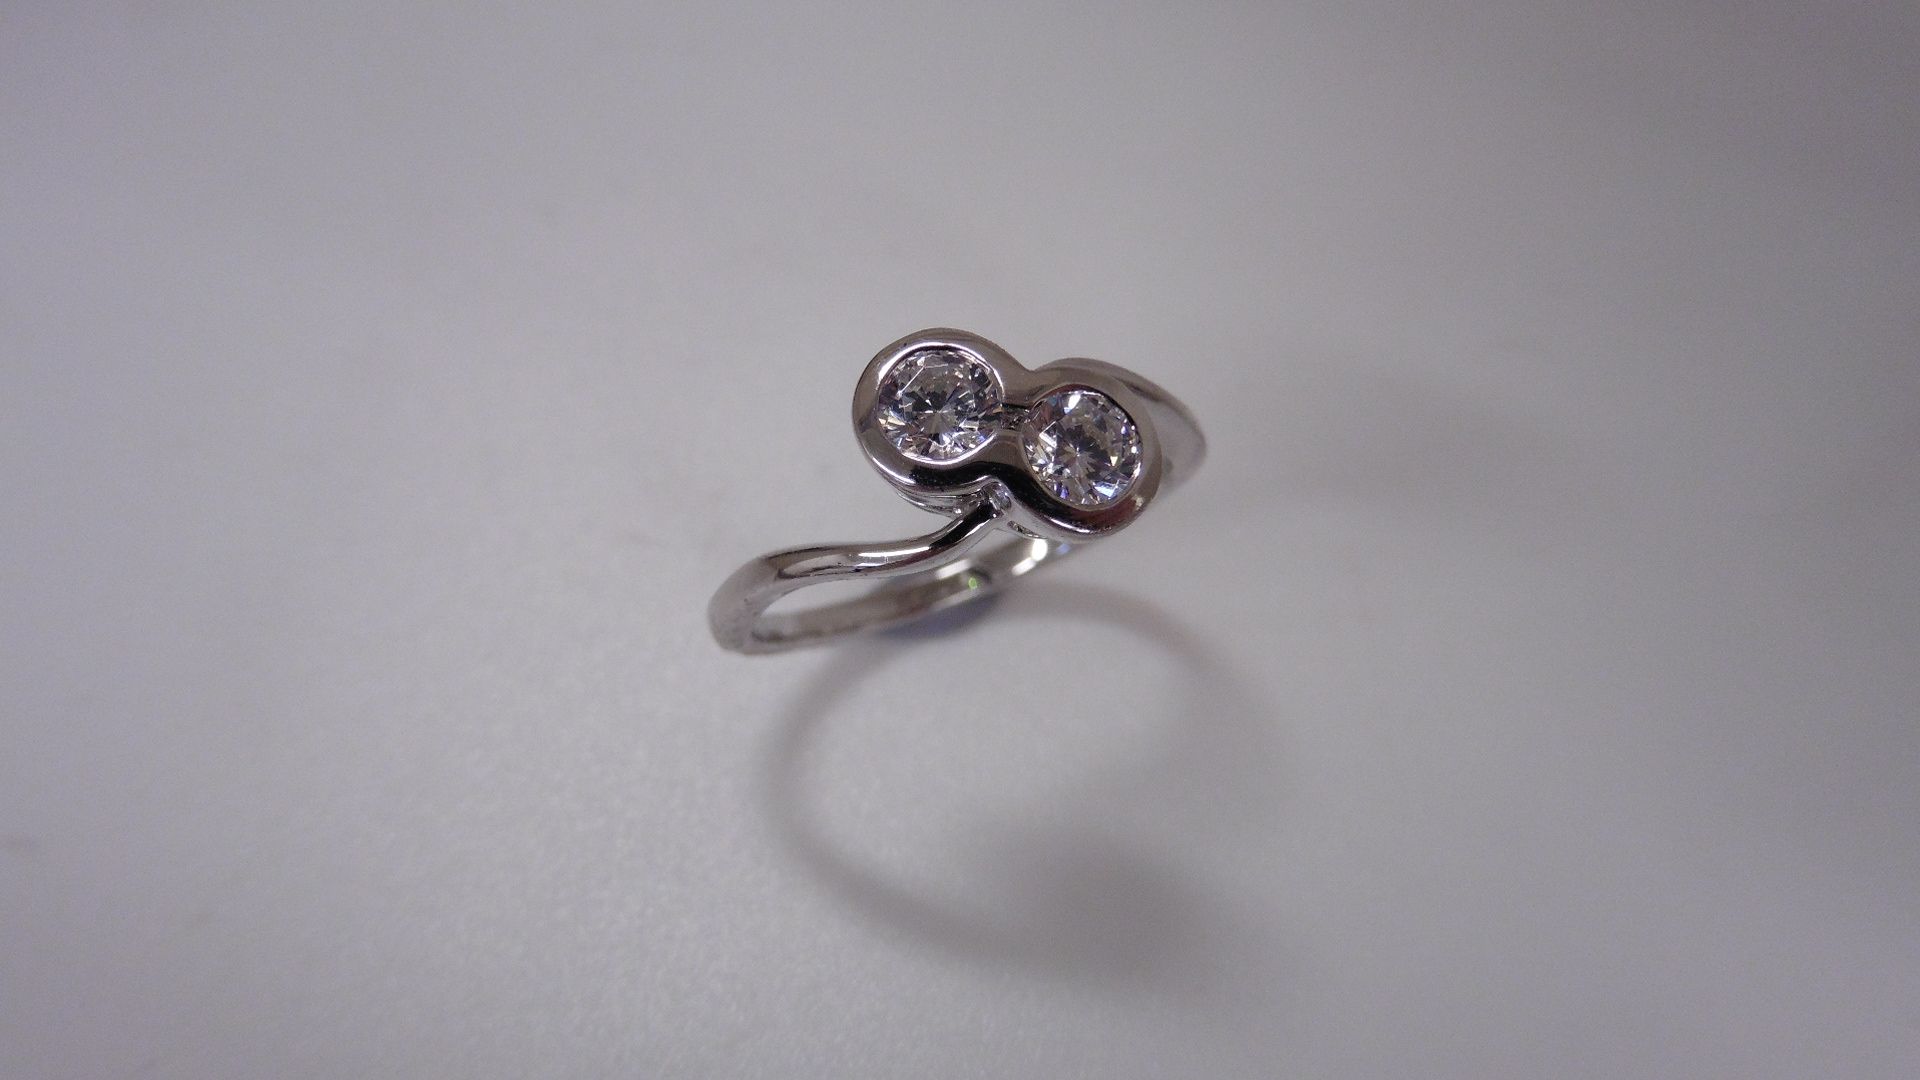 1ct two stone twist ring set in platinum. Brilliant cut diamonds, I/J colour, si2 clarity weighing